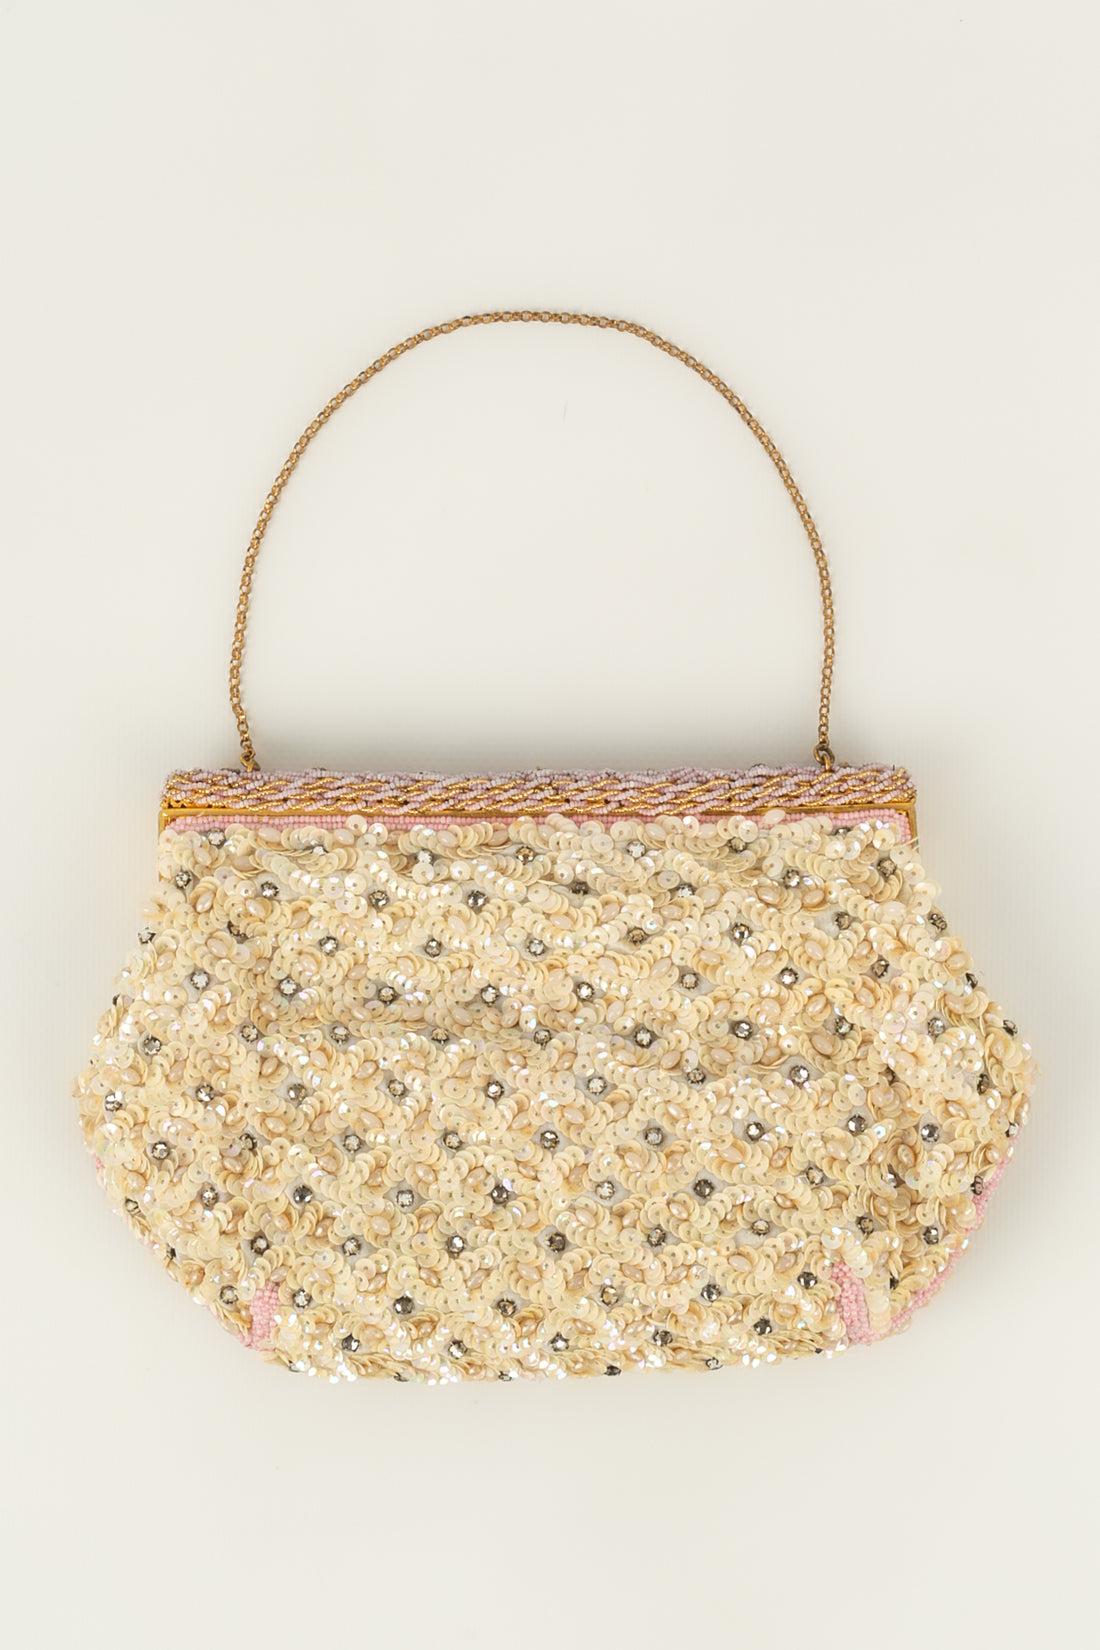 Women's Sequinned Bag in Beige and Pink, 1960s